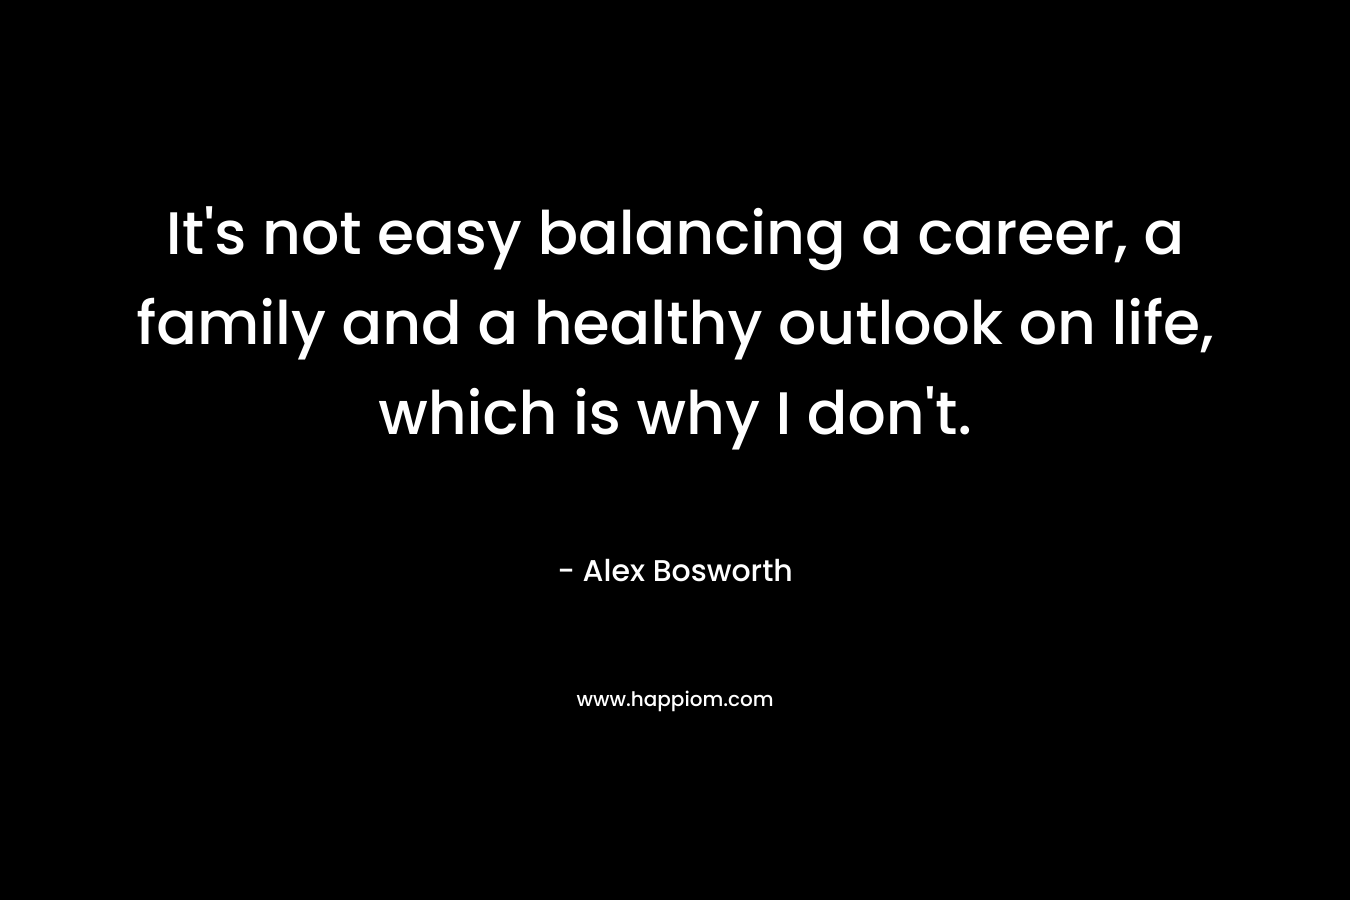 It's not easy balancing a career, a family and a healthy outlook on life, which is why I don't.